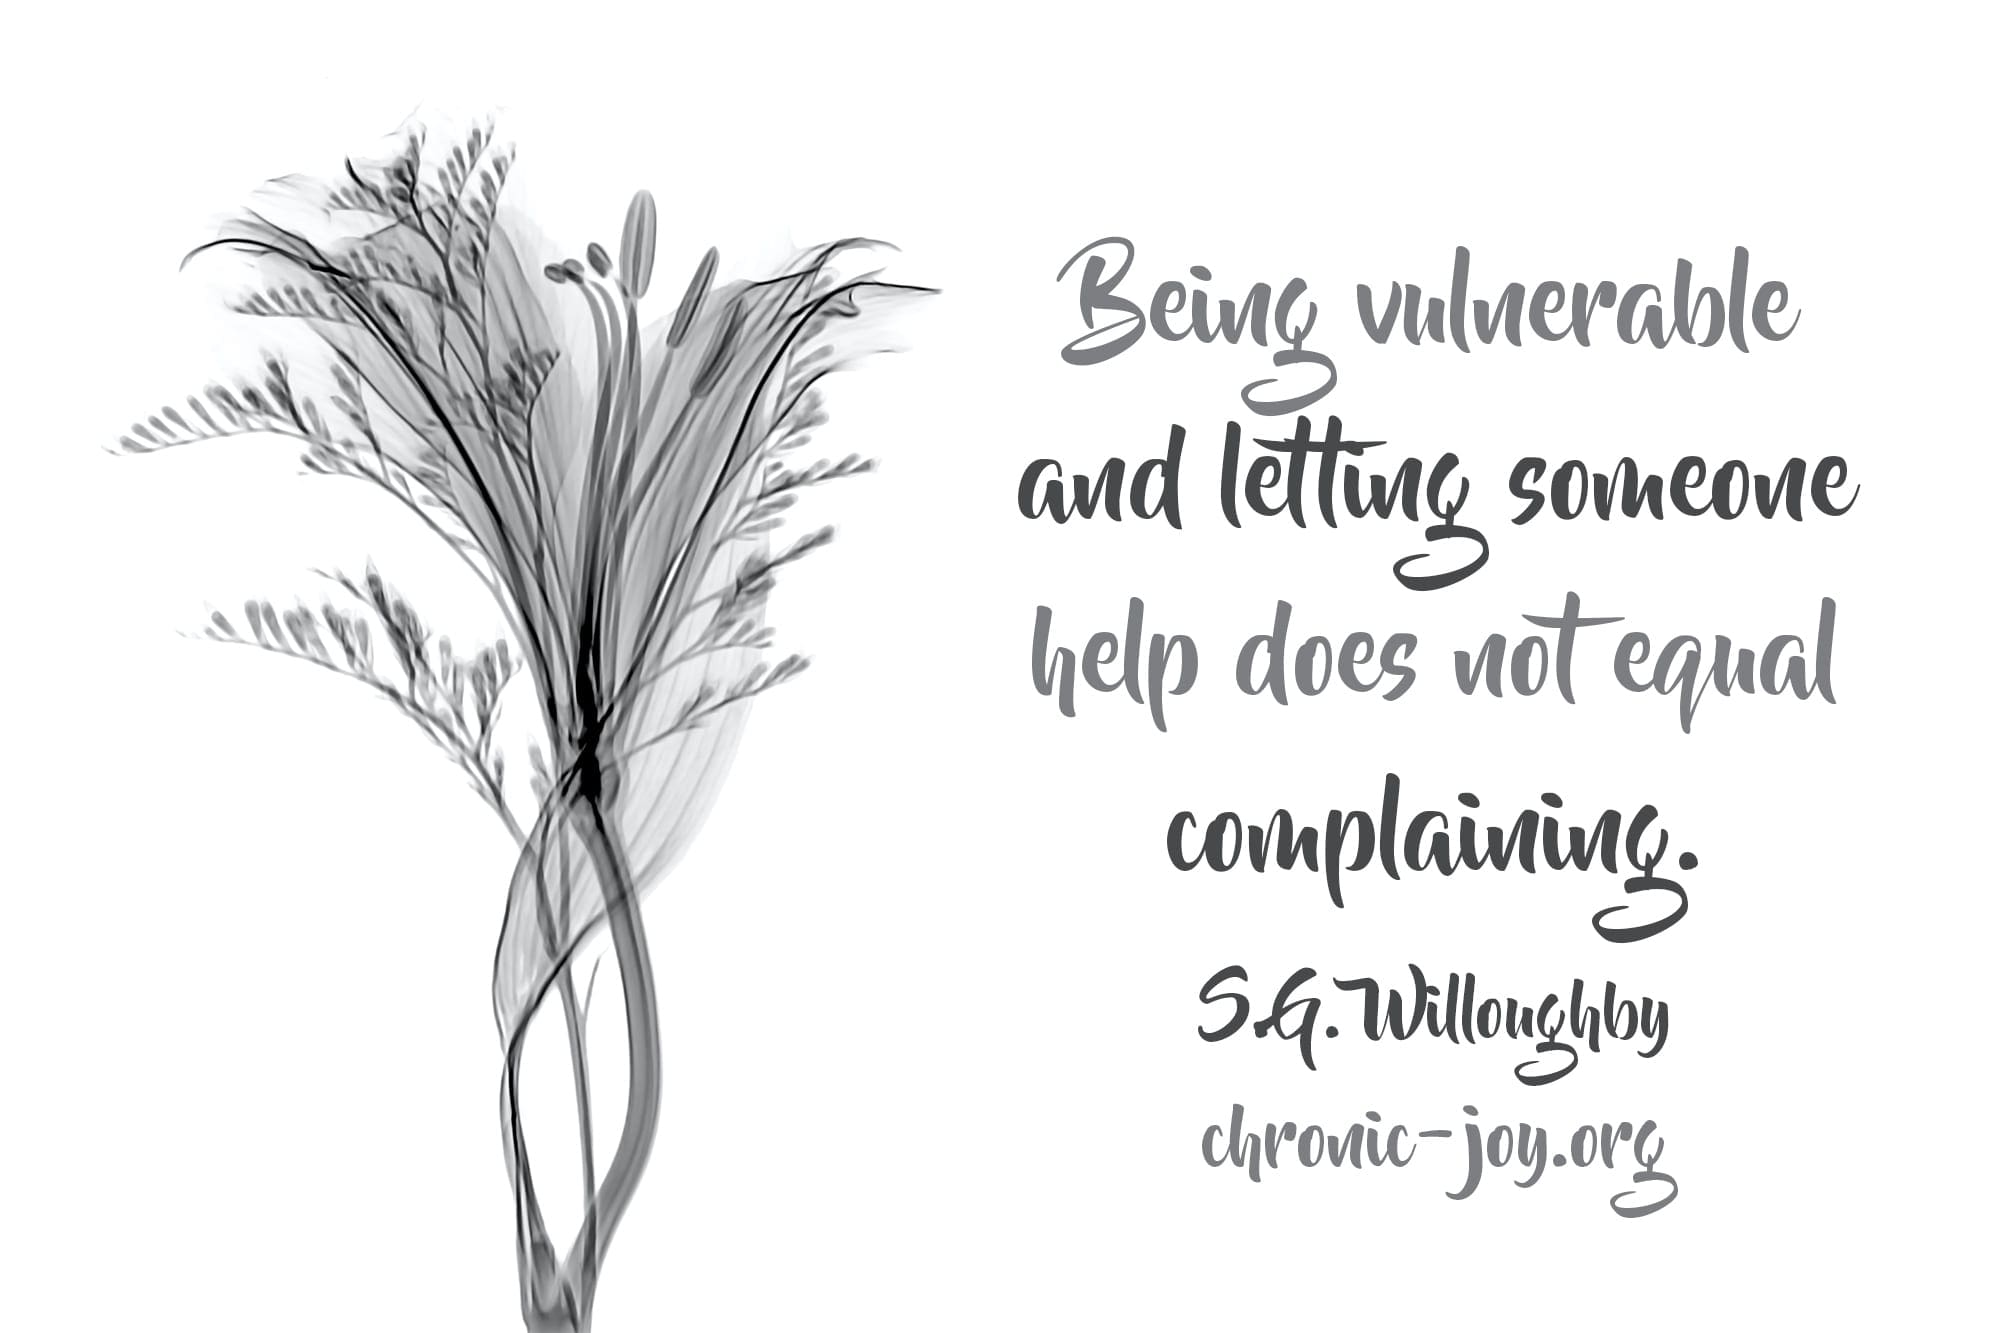 "Being vulnerable and letting someone help does not equal complaining." S.G. Willoughby